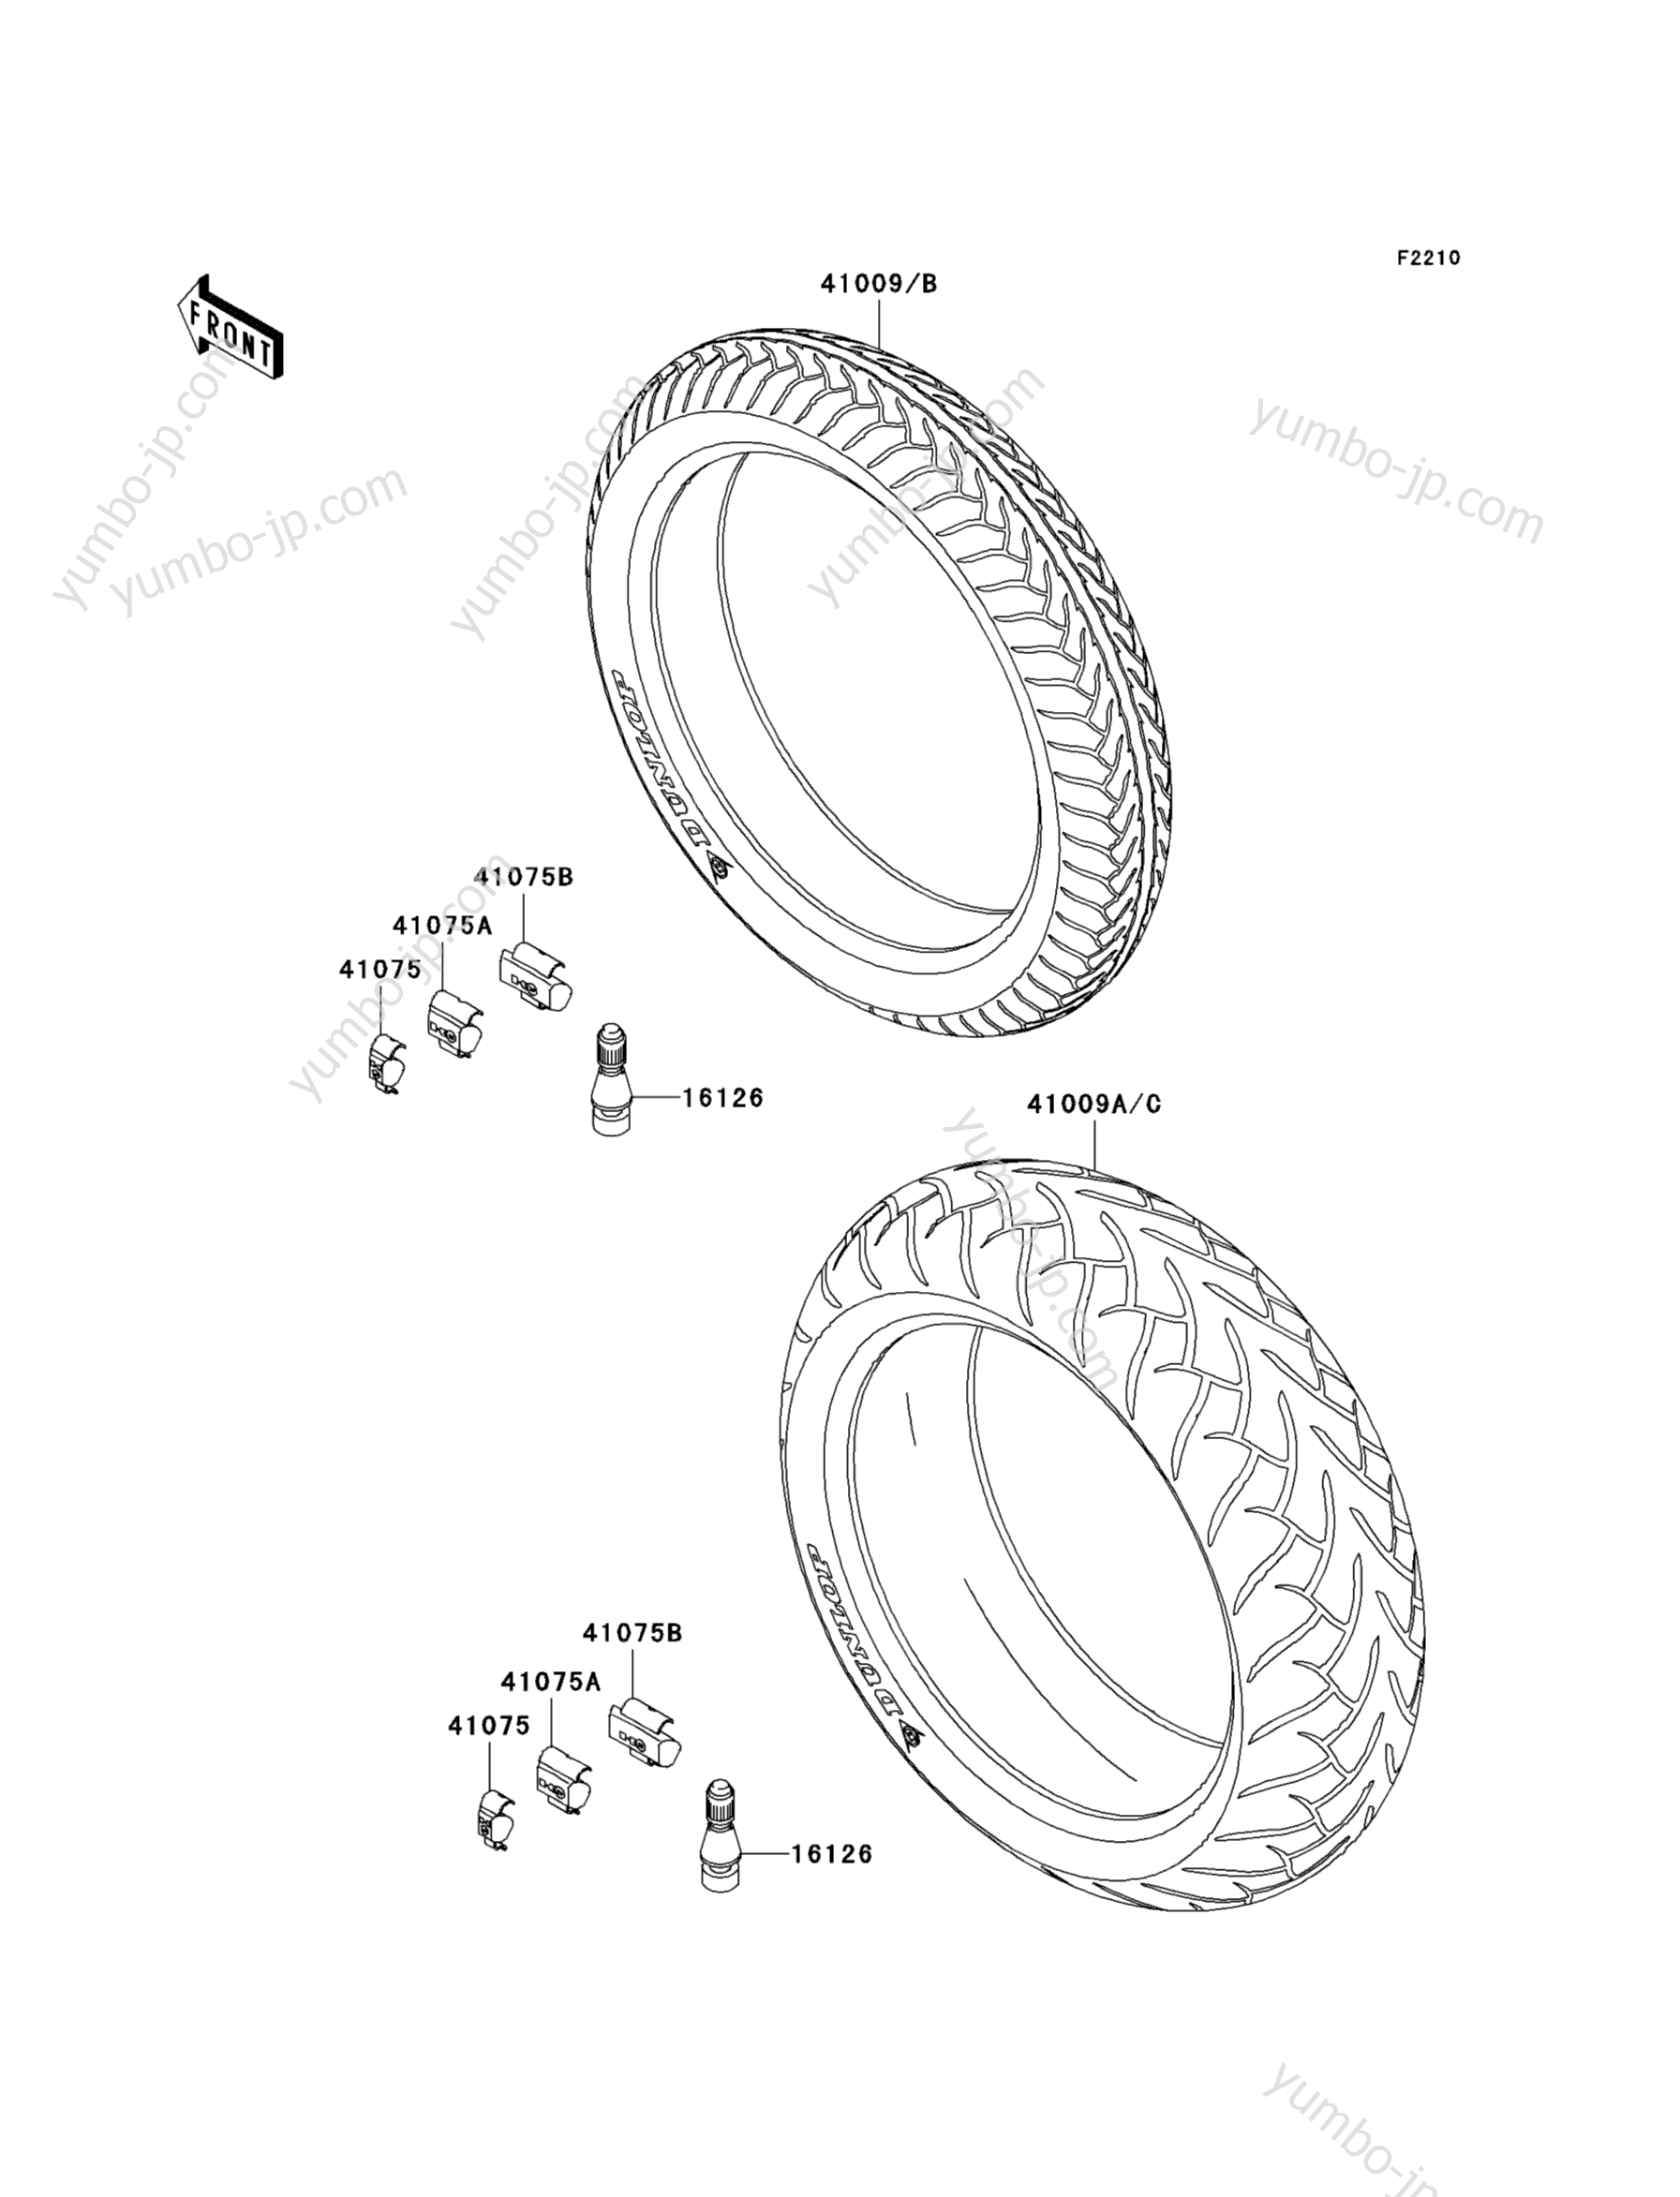 Tires for motorcycles KAWASAKI ZZR1200 (ZX1200-C3) 2004 year